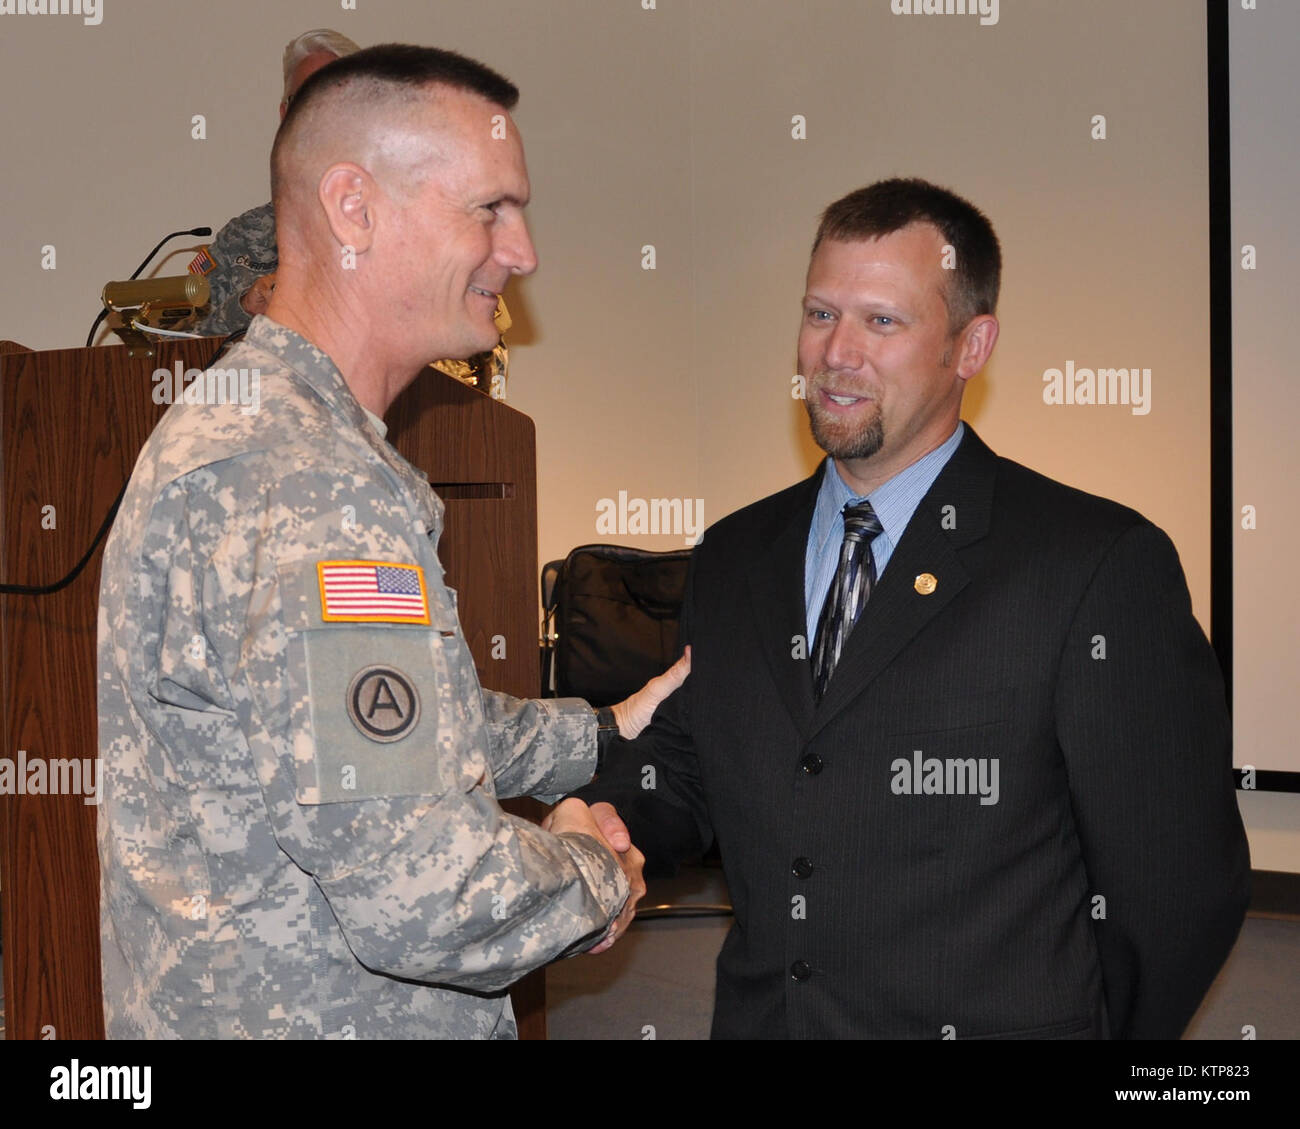 LATHAM, NY -- Major General Patrick A. Murphy, Adjutant General of the New York National Guard congratulates NYS Division of Military and Naval Affairs Office of Administrative Services employee Greg Carpenter after presenting him with the Adjutant General's Award during an award ceremony here on May 23. Stock Photo